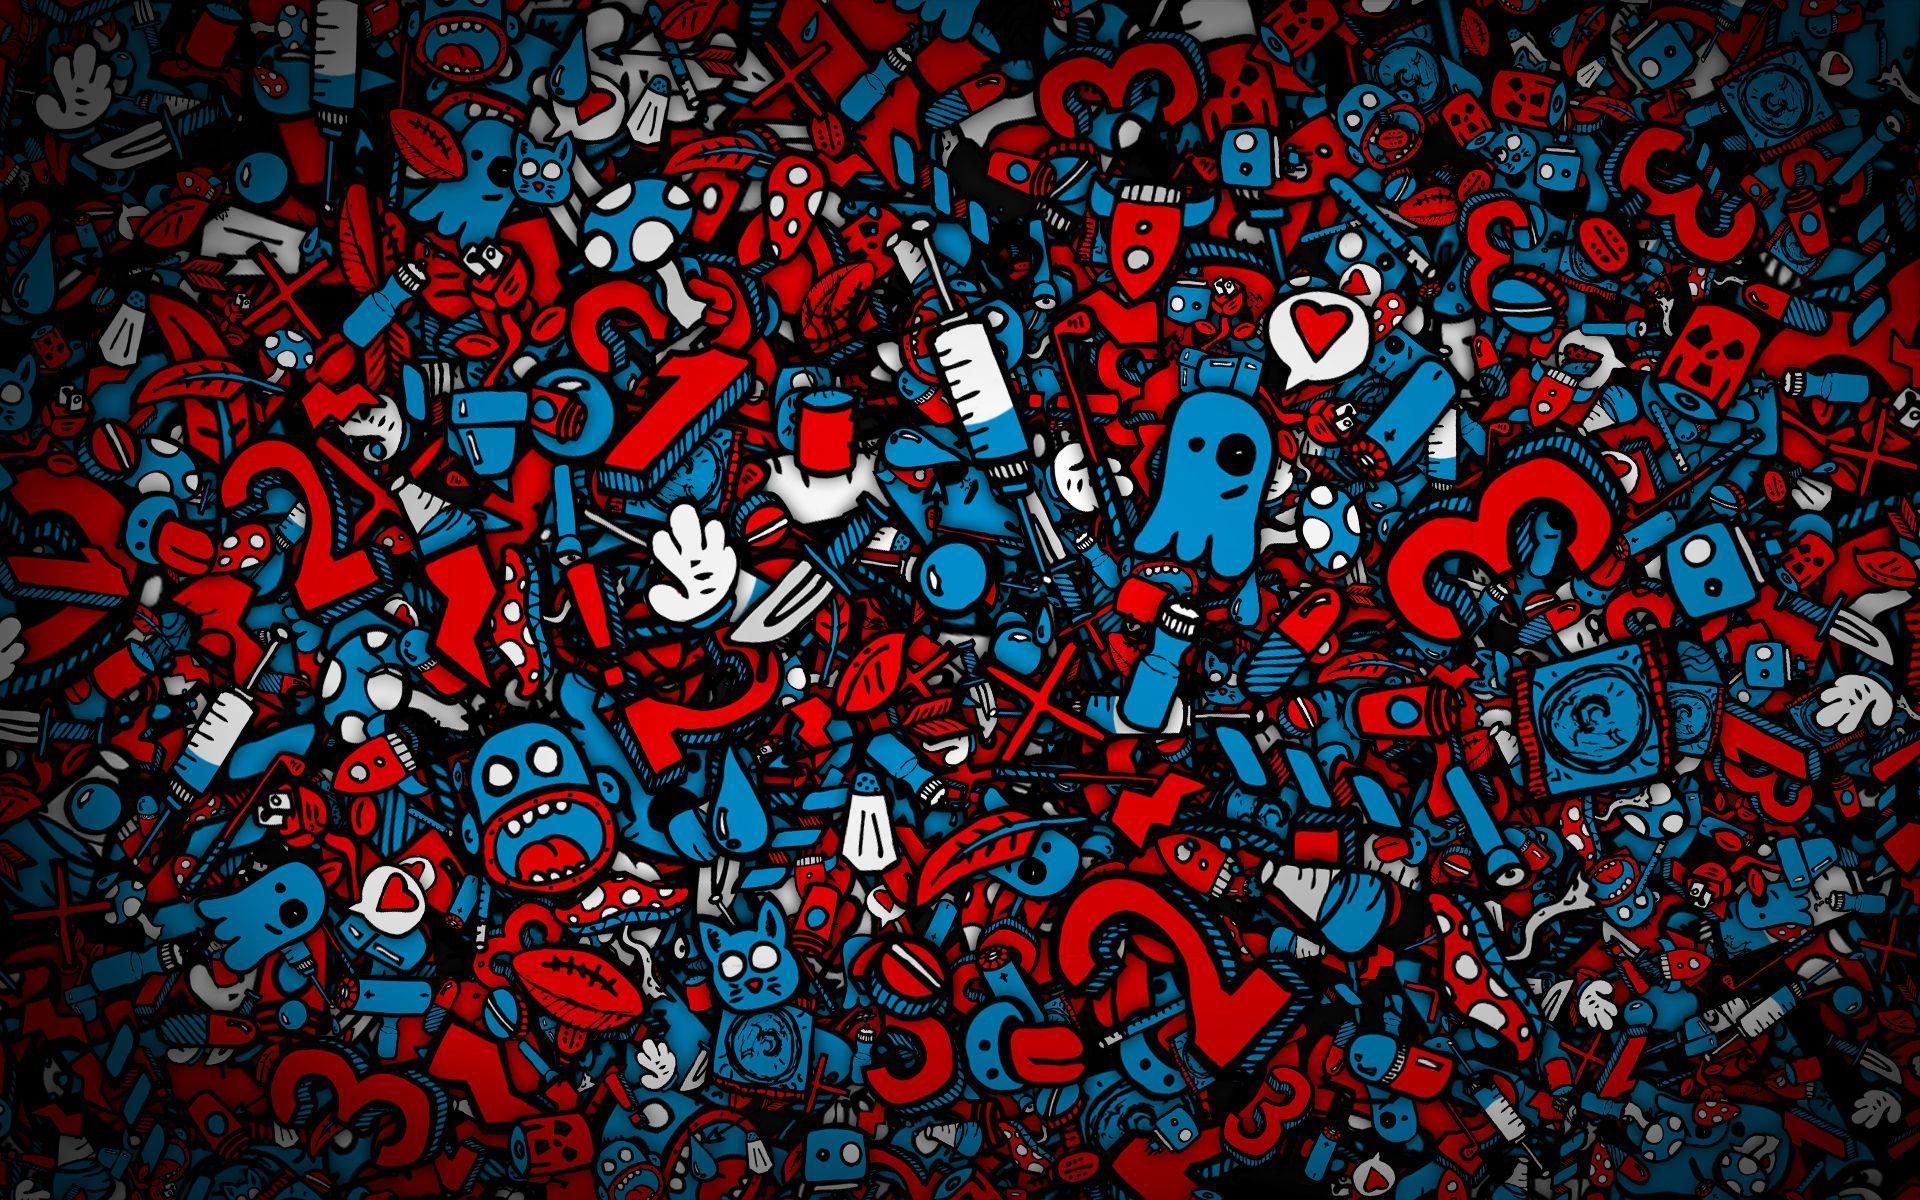 Hd Graffiti Wallpapers Wallpaper Cave Perfect screen background display for desktop, iphone, pc. hd graffiti wallpapers wallpaper cave